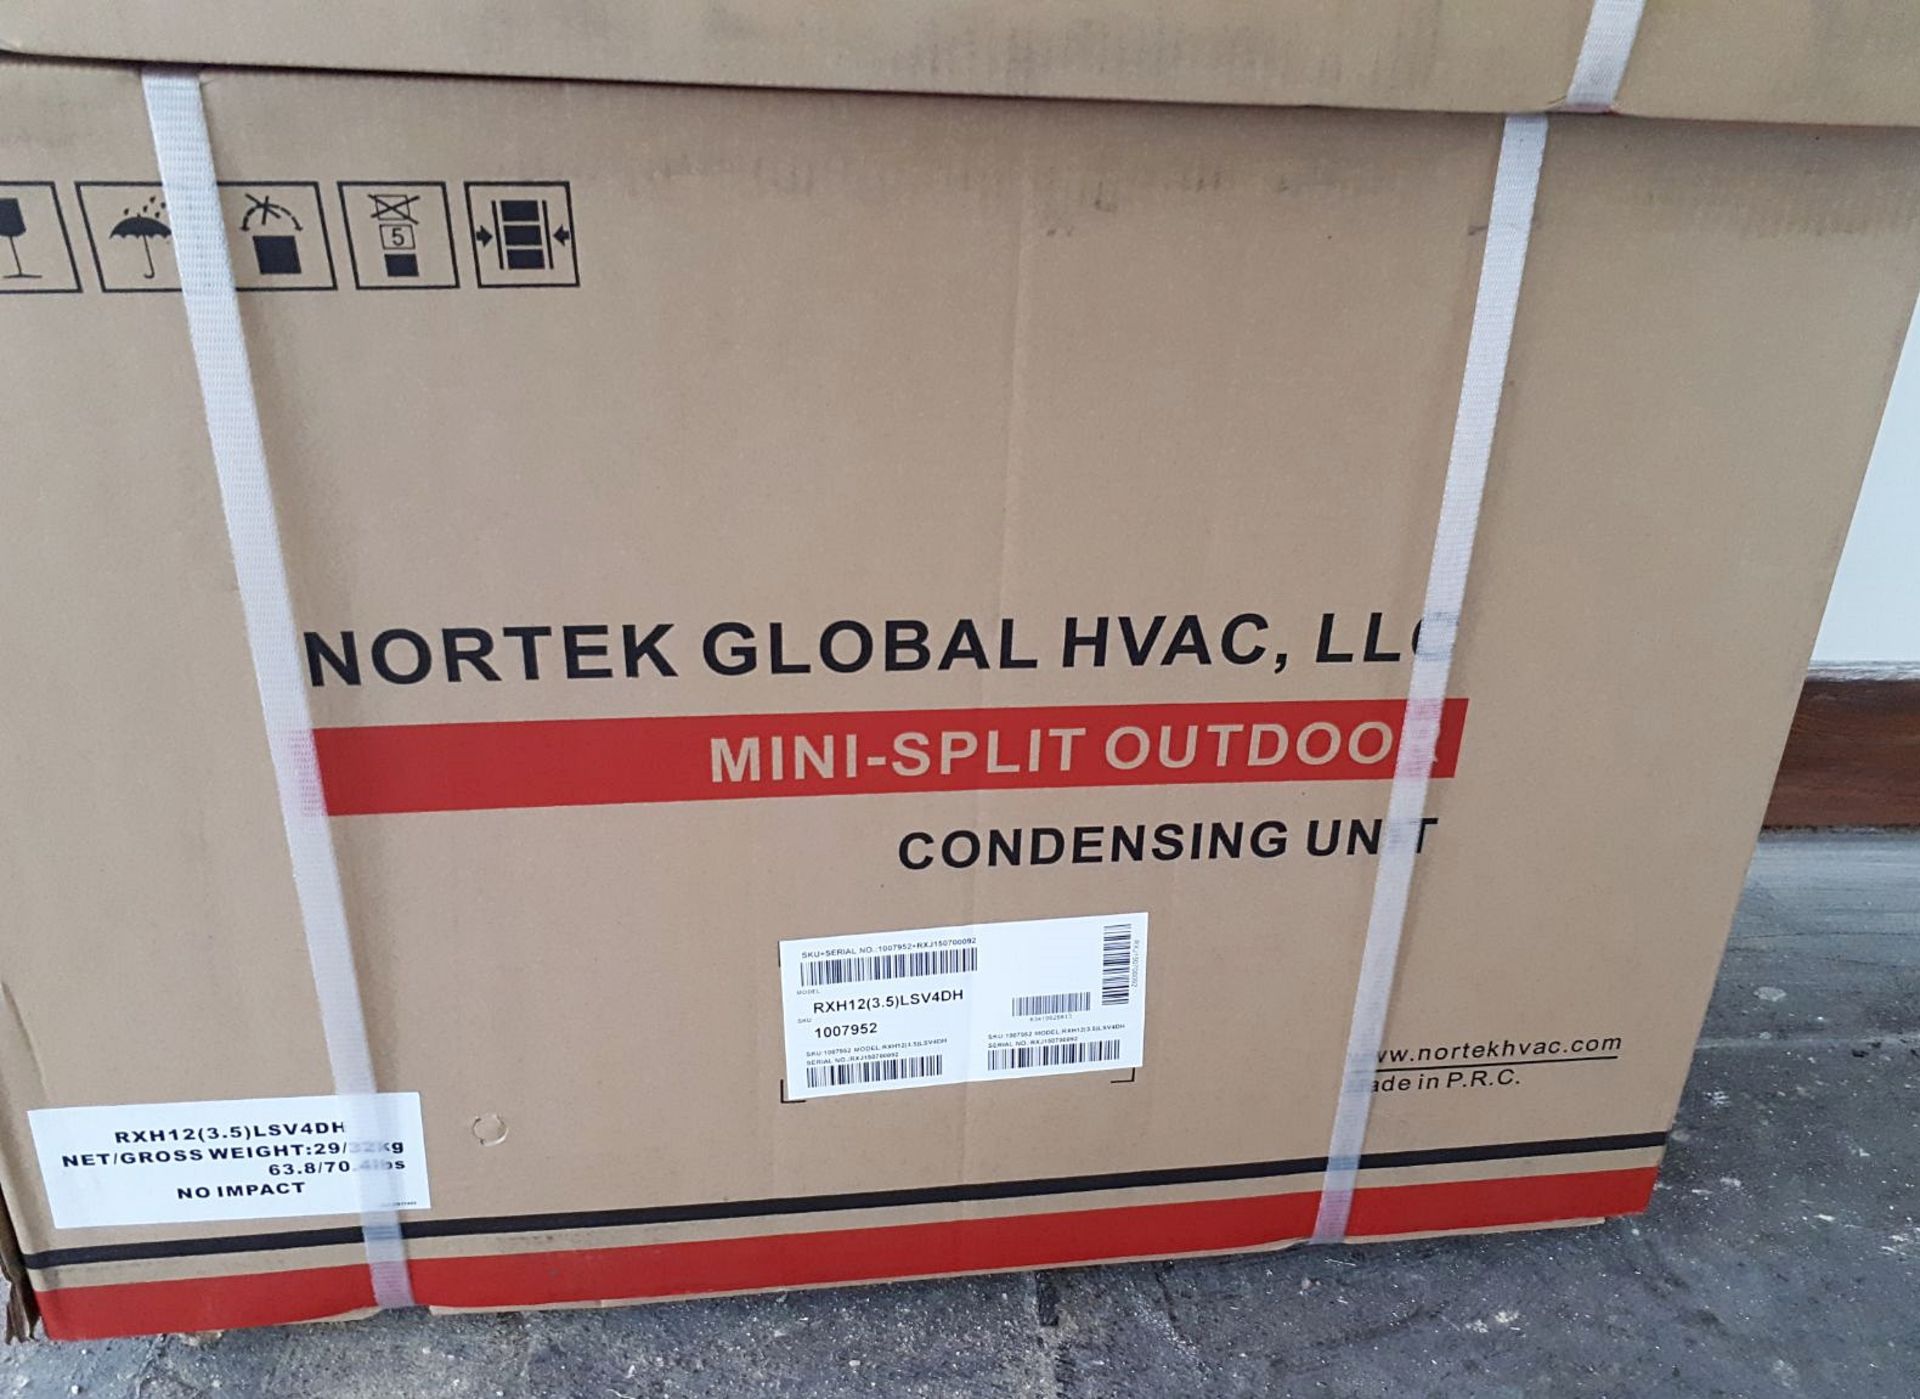 10 x Nortex 'Reznor' Air Conditioning 5.3kw& Mini Split Systems - Model RHH18 -Brand New Boxed Stock - Image 4 of 5